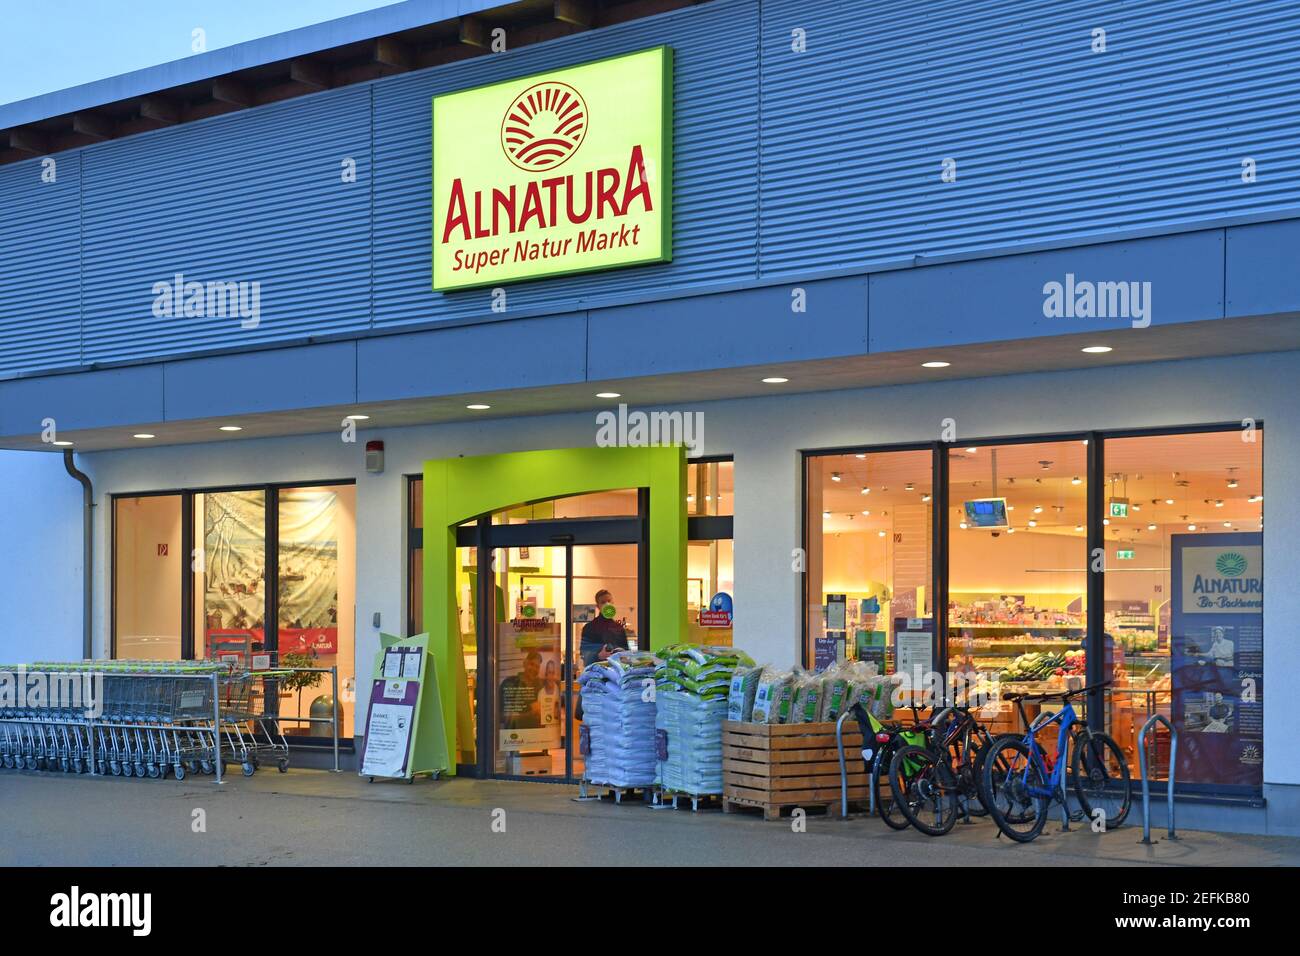 Alnatura Super Nature Market. Alnatura Produktions- und Handels GmbH is a  German company in the organic food industry with headquarters in Darmstadt.  Exterior shot of a branch, shop, business | usage worldwide